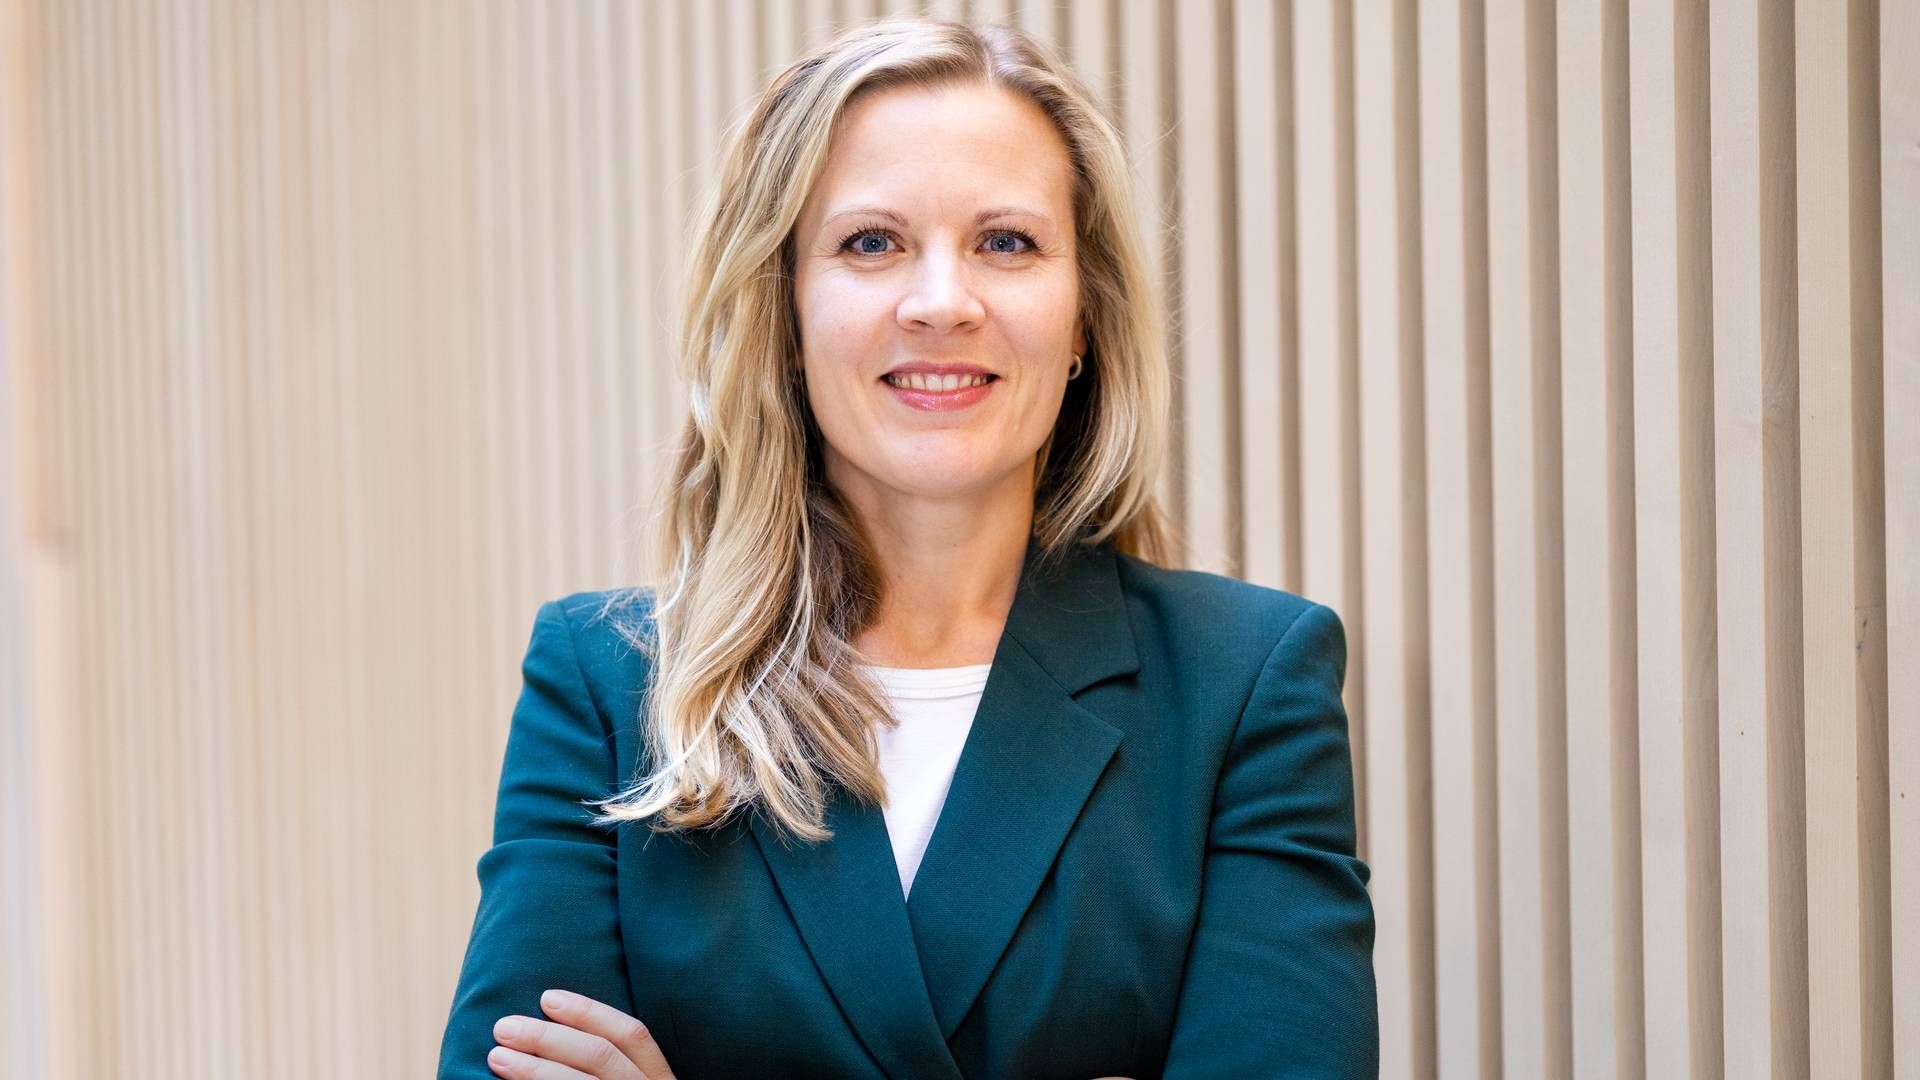 Heidi Finskas is vice president of corporate sustainability at KLP | Photo: KLP